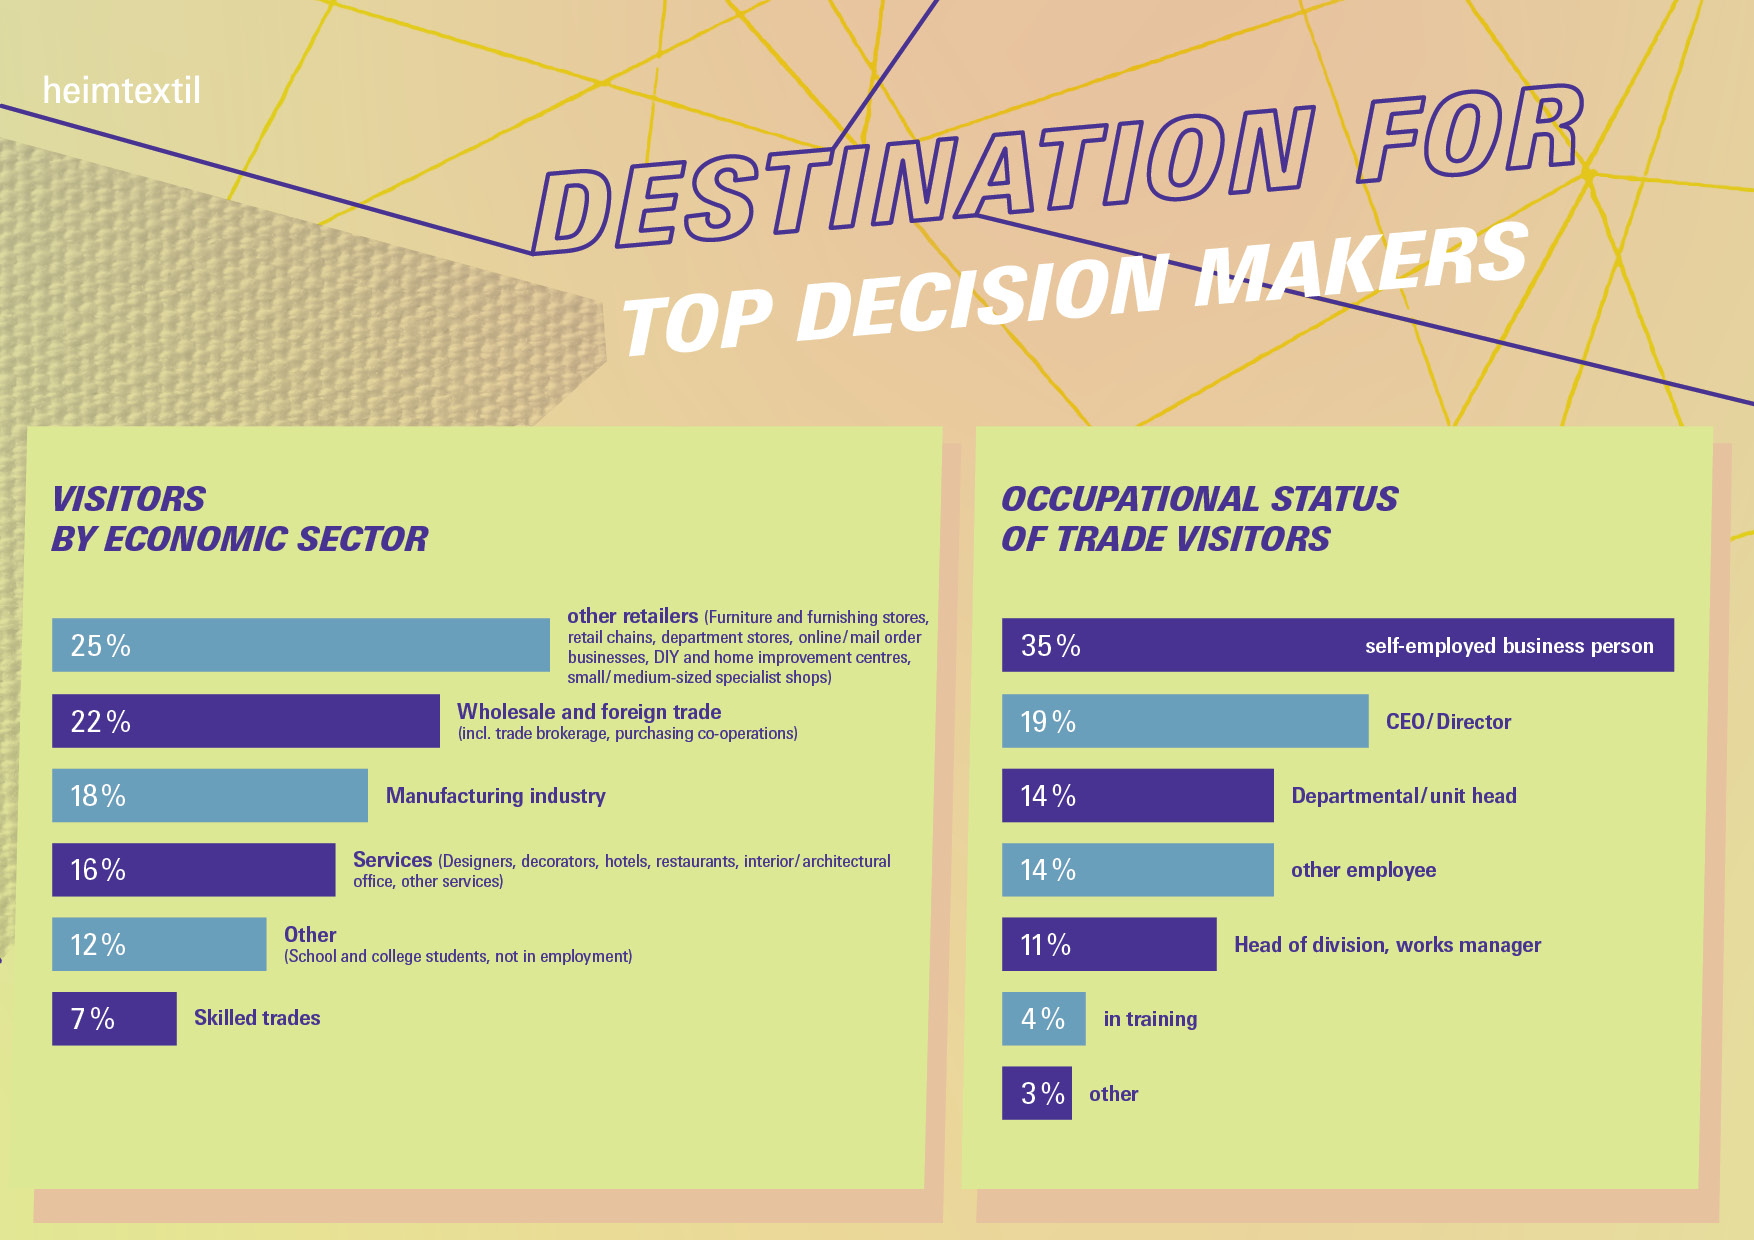 Destianation for top decision makers